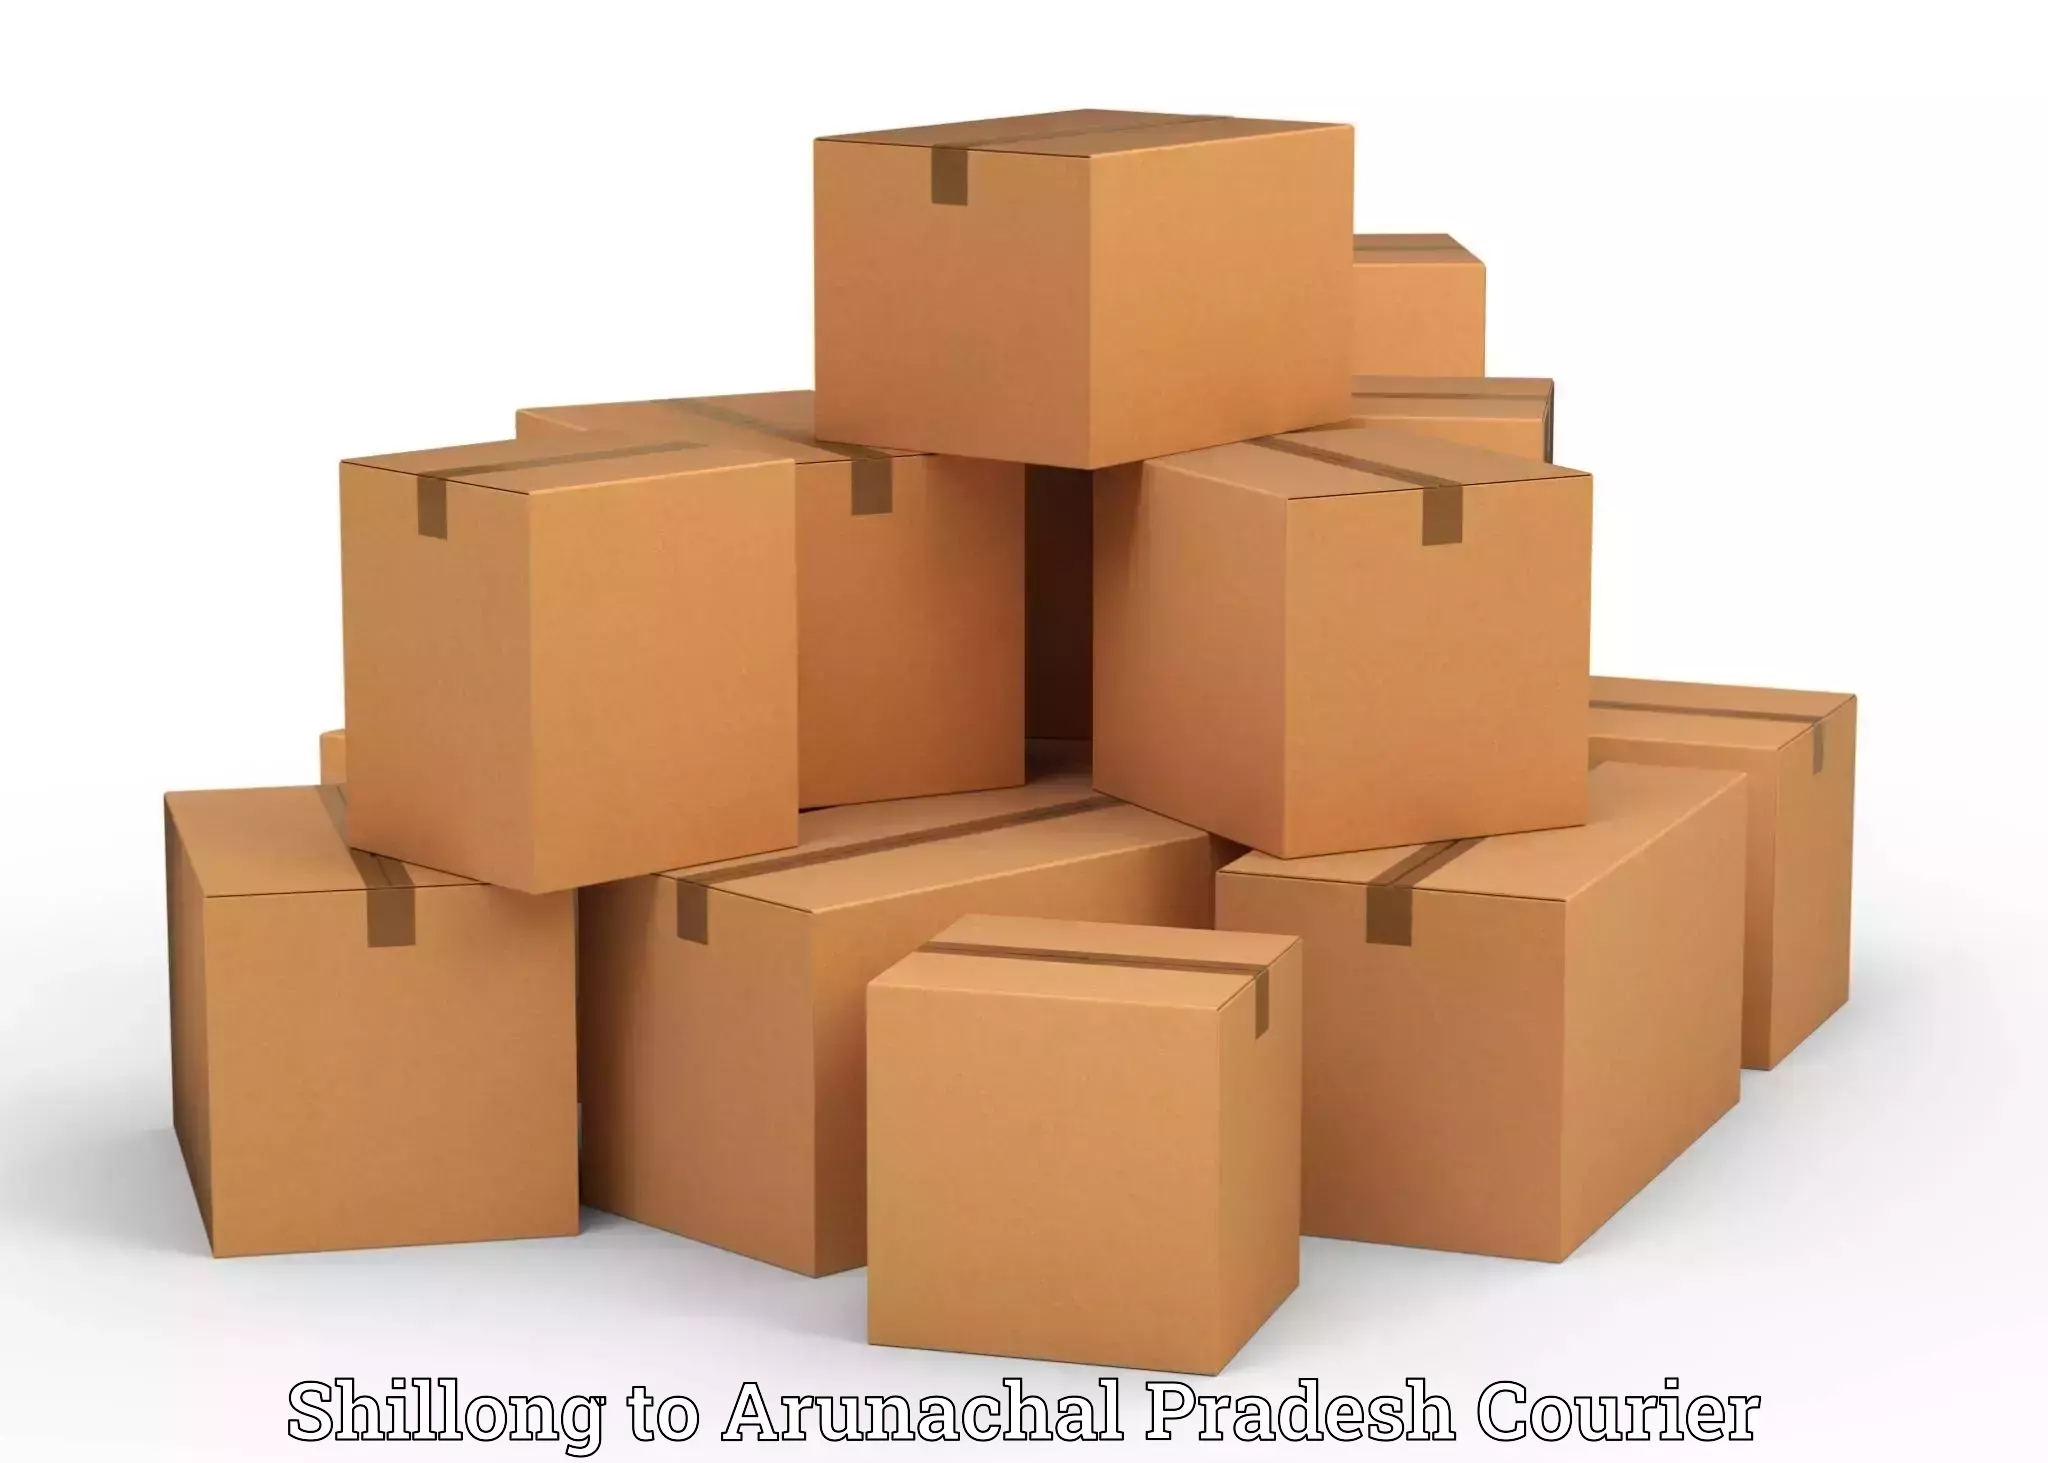 Quality relocation assistance Shillong to Dirang